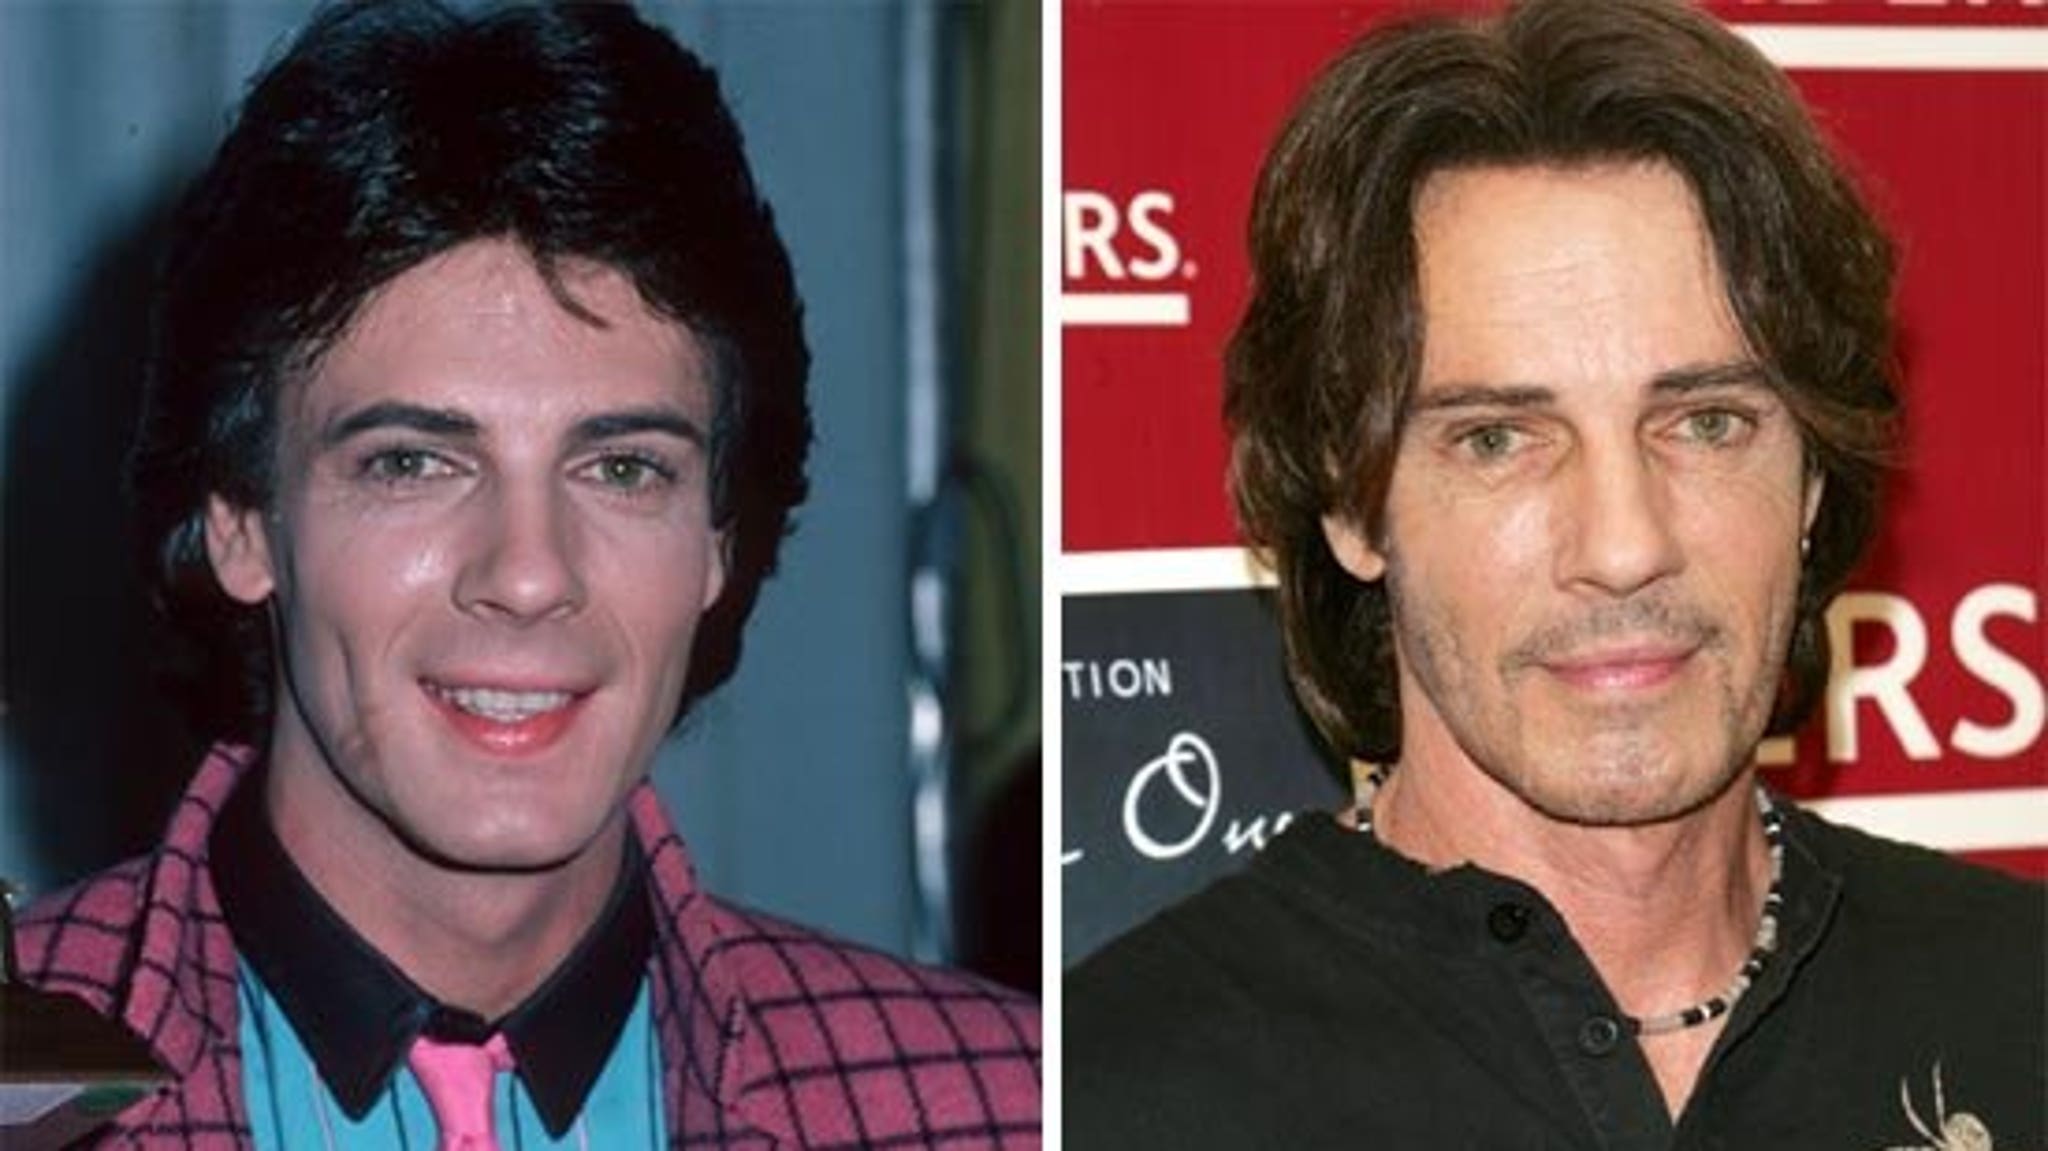 80s Singer Rick Springfield spends a lot time with doctors ... playing one ...